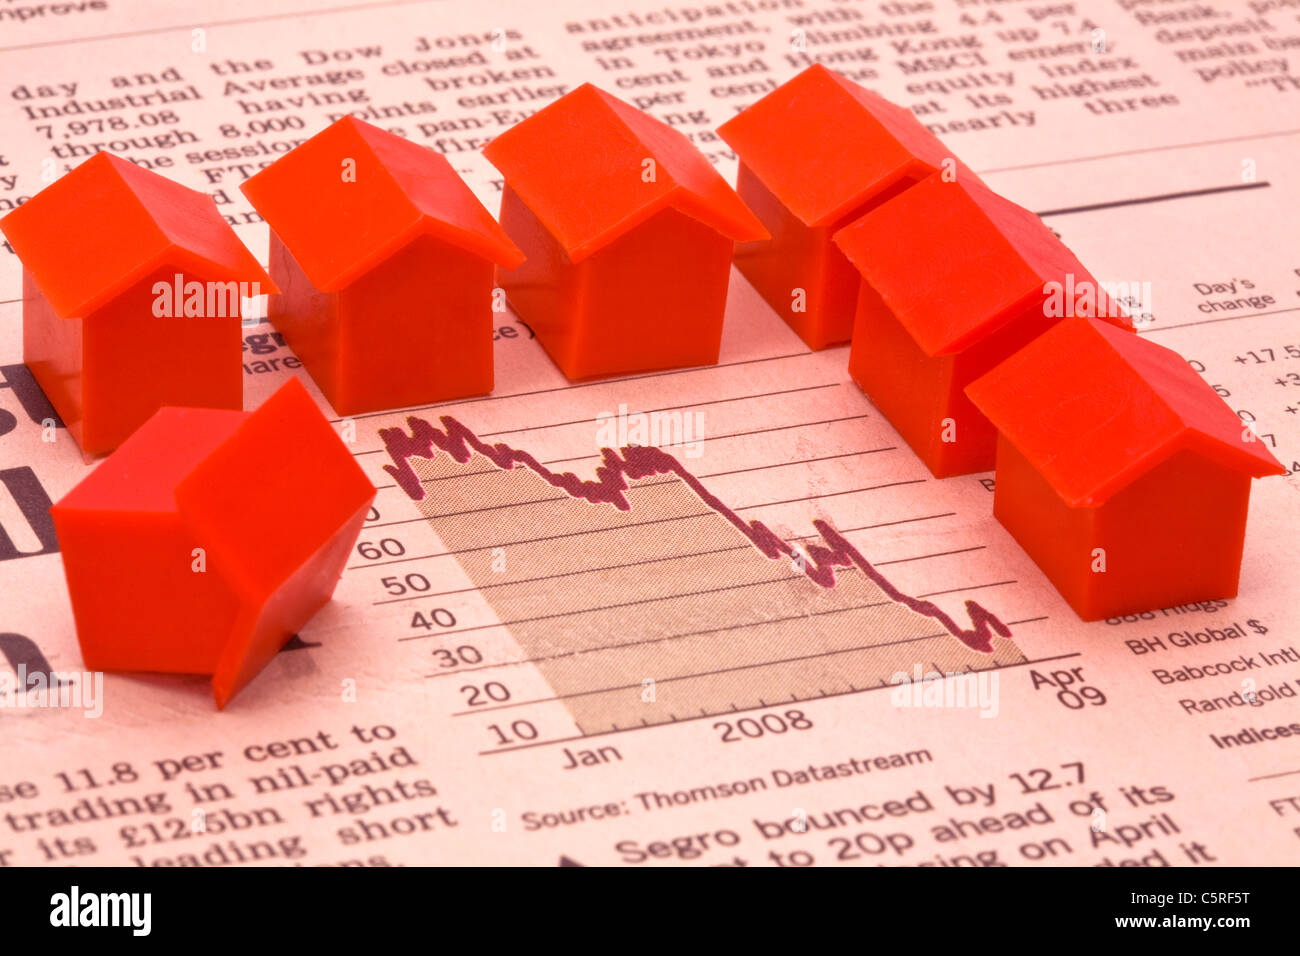 image of the FT with a downward graph depicting the fall in the UK housing market and mortgage rates Stock Photo